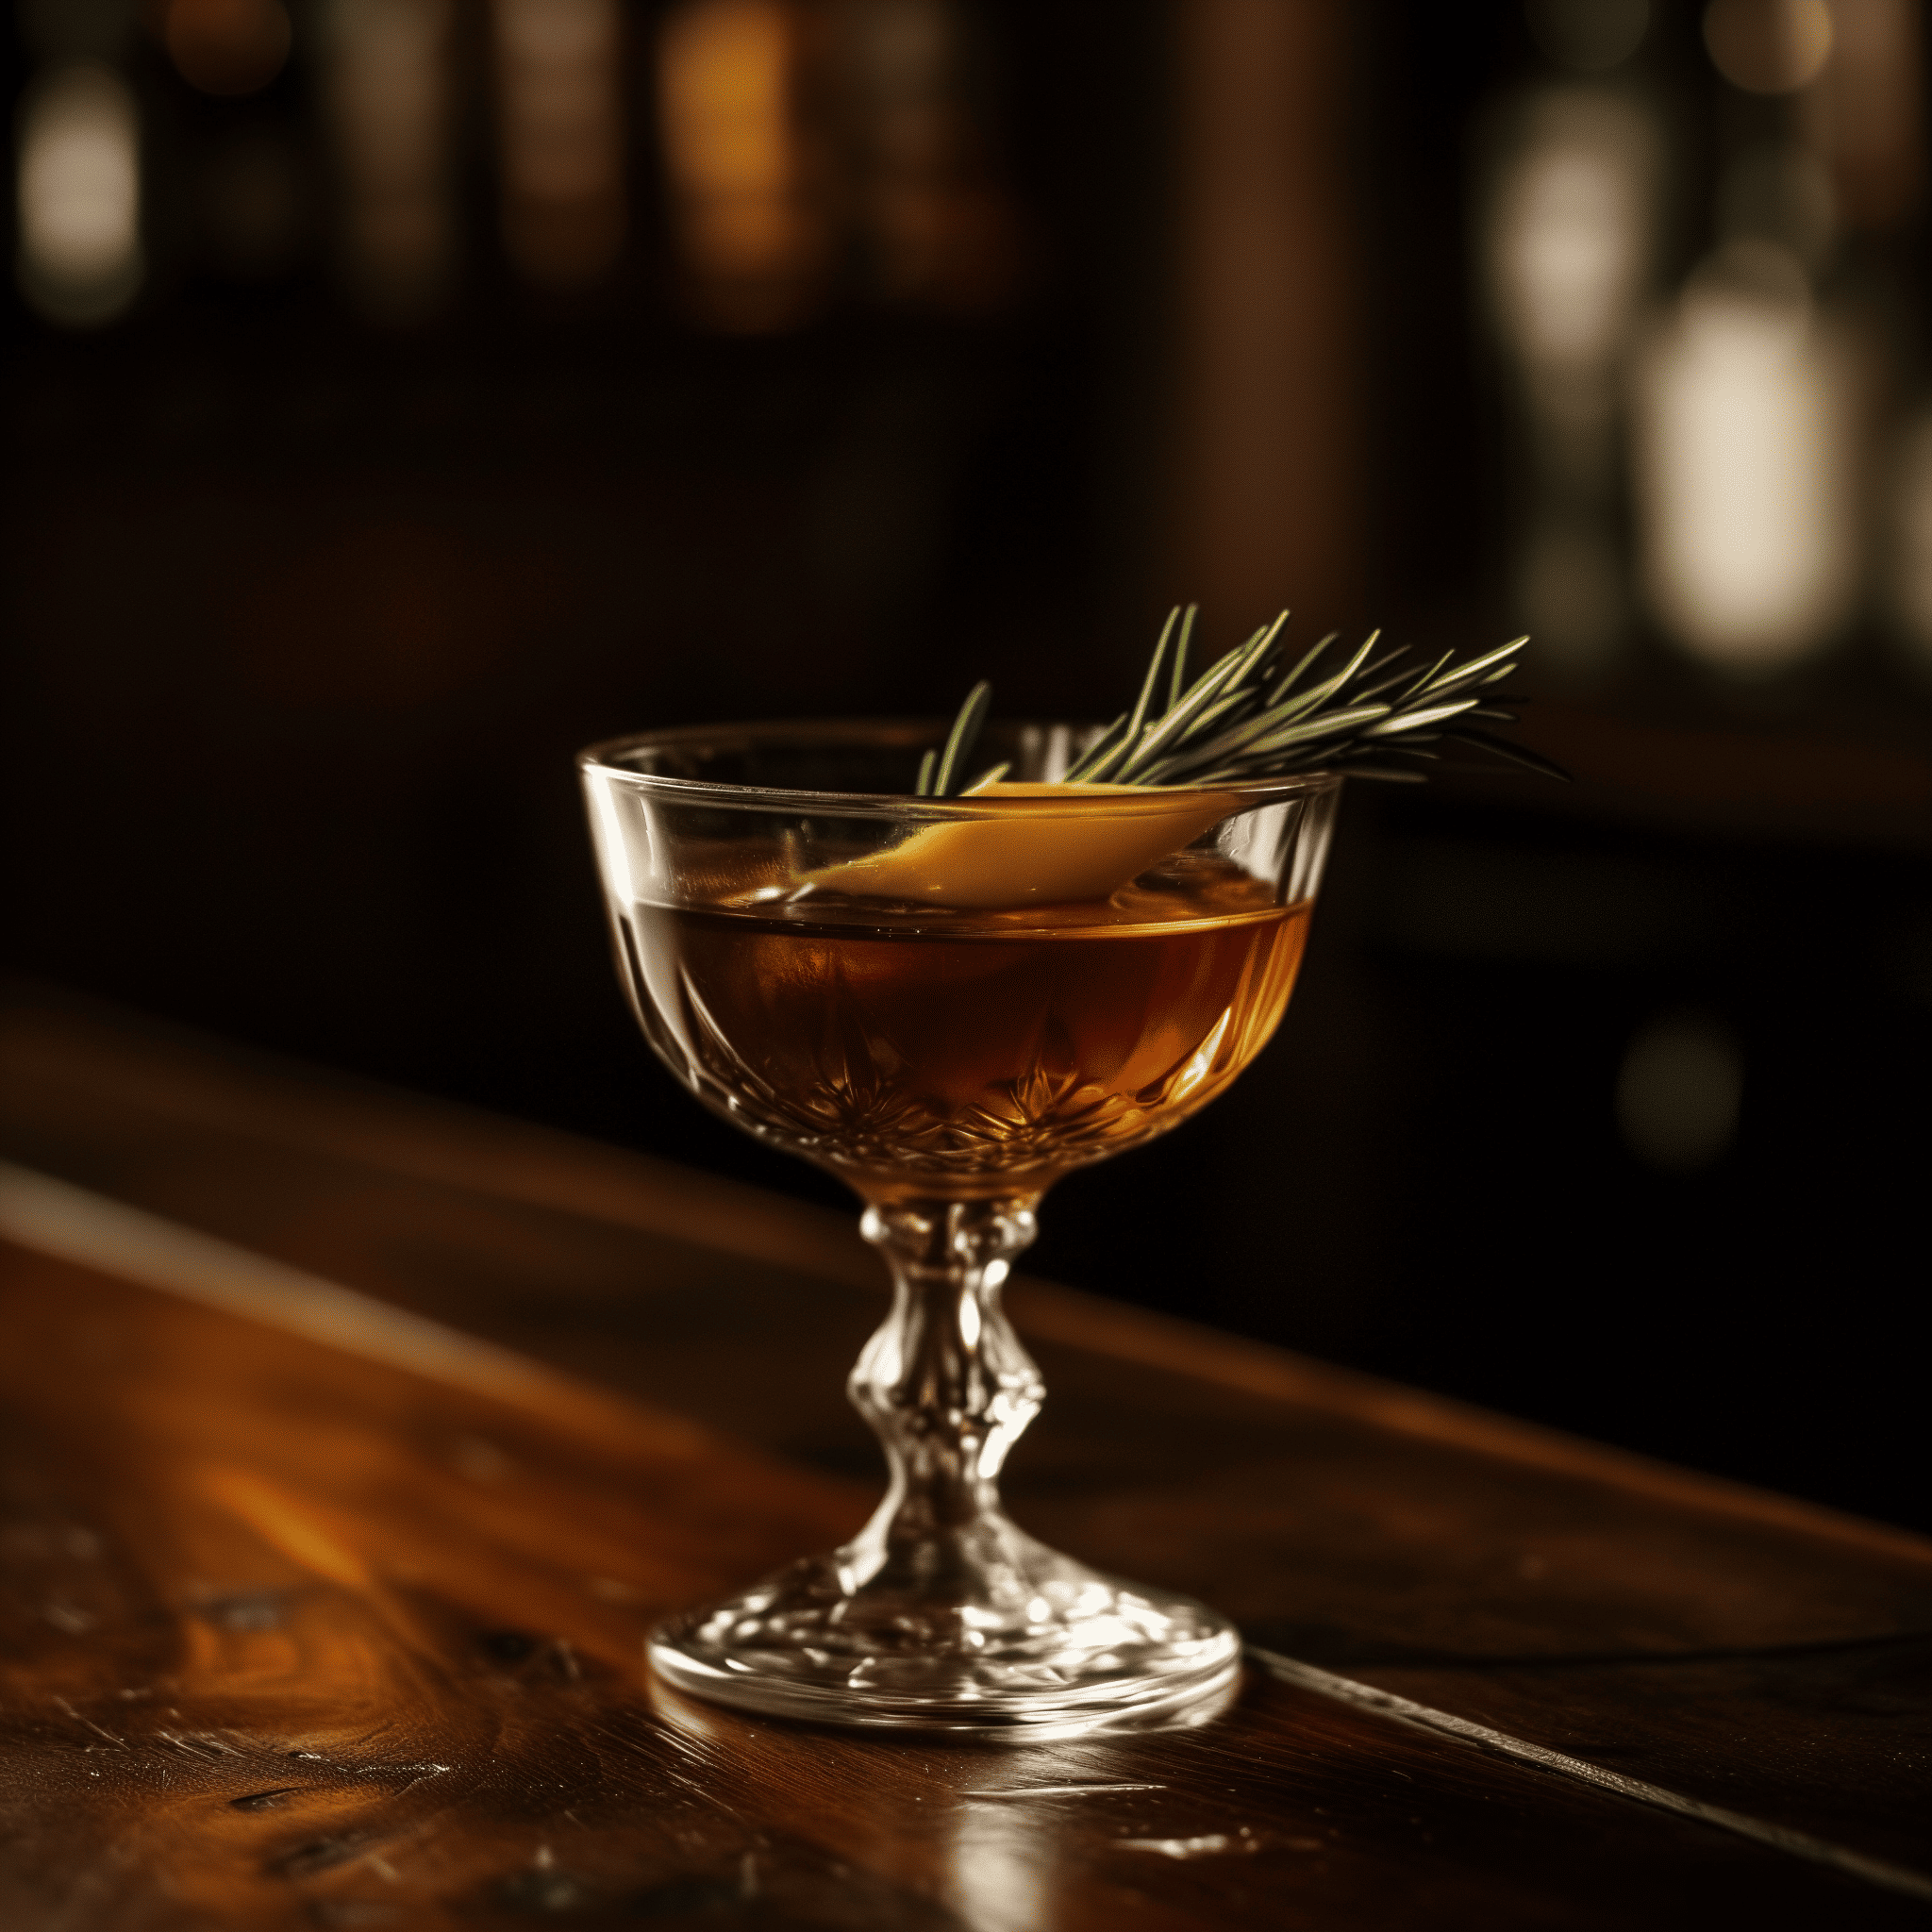 Amaretto Manhattan Cocktail Recipe - The Amaretto Manhattan offers a rich and complex flavor profile. It's a harmonious blend of the spicy and oaky notes from the rye whiskey, the herbal and sweet characteristics of the sweet vermouth, and the distinctive almond sweetness from the amaretto. The bitters contribute a subtle spice and a hint of citrus from the lemon bitters, rounding out the cocktail with a balanced and slightly bitter finish.